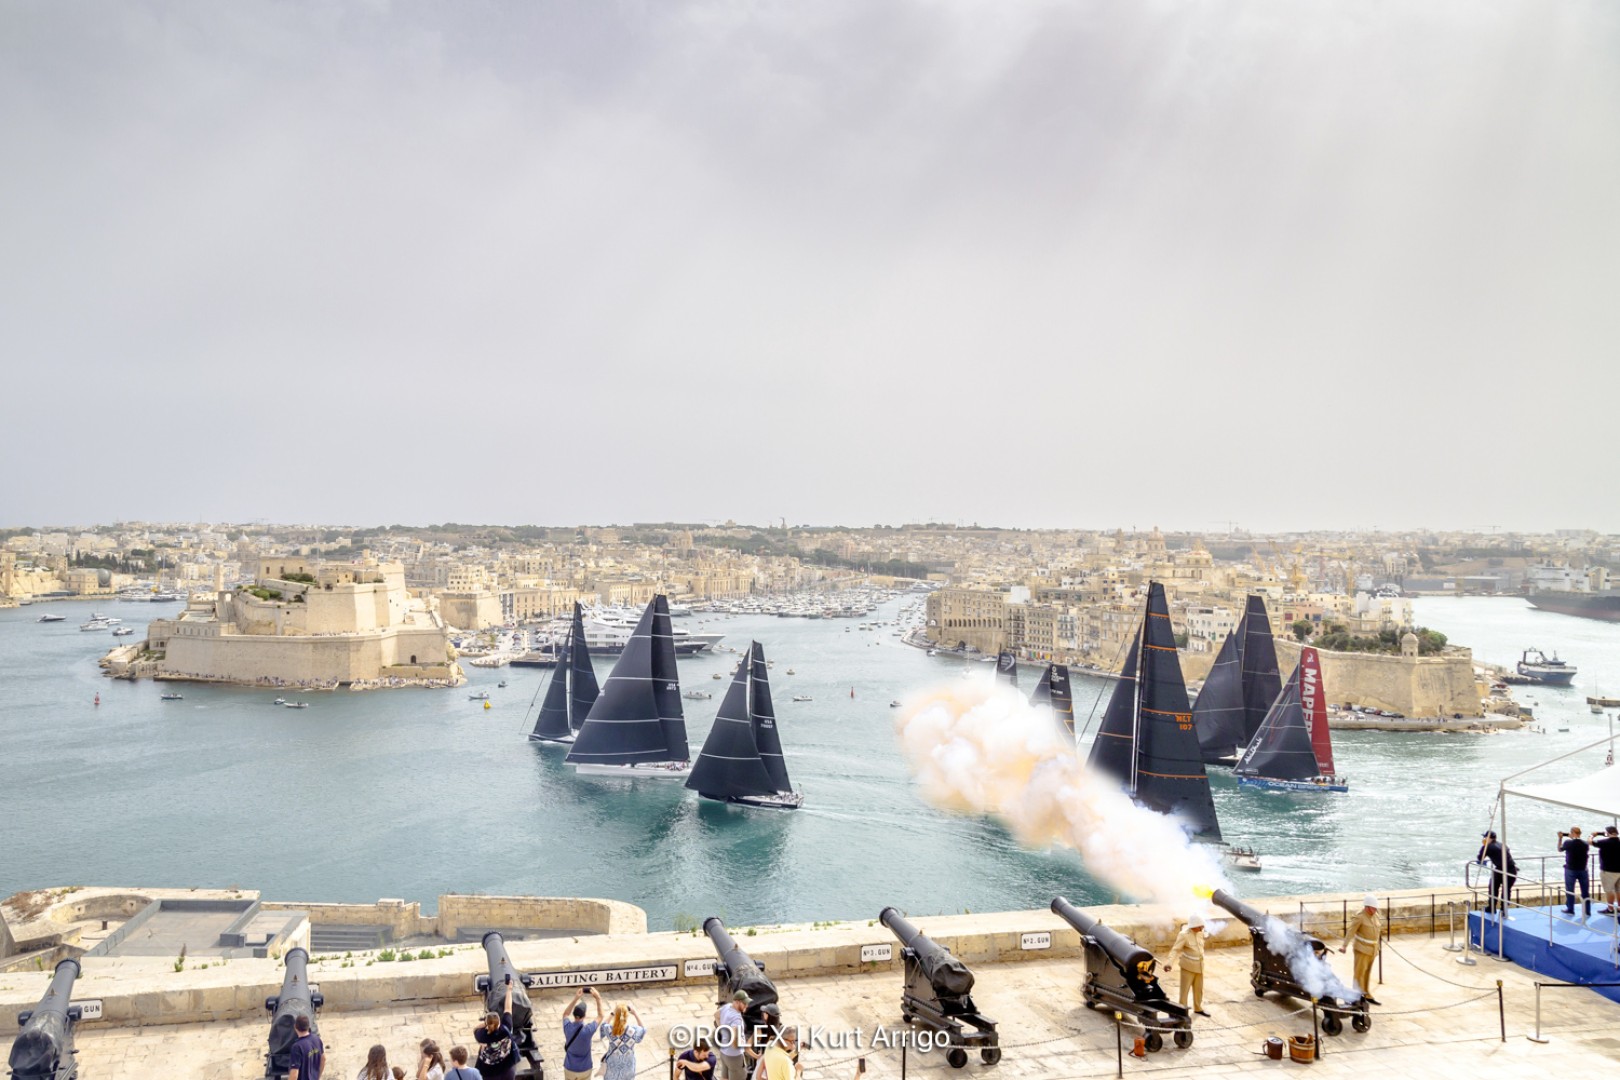 Clean Start Heralds Next Chapter in Rolex Middle Sea Race